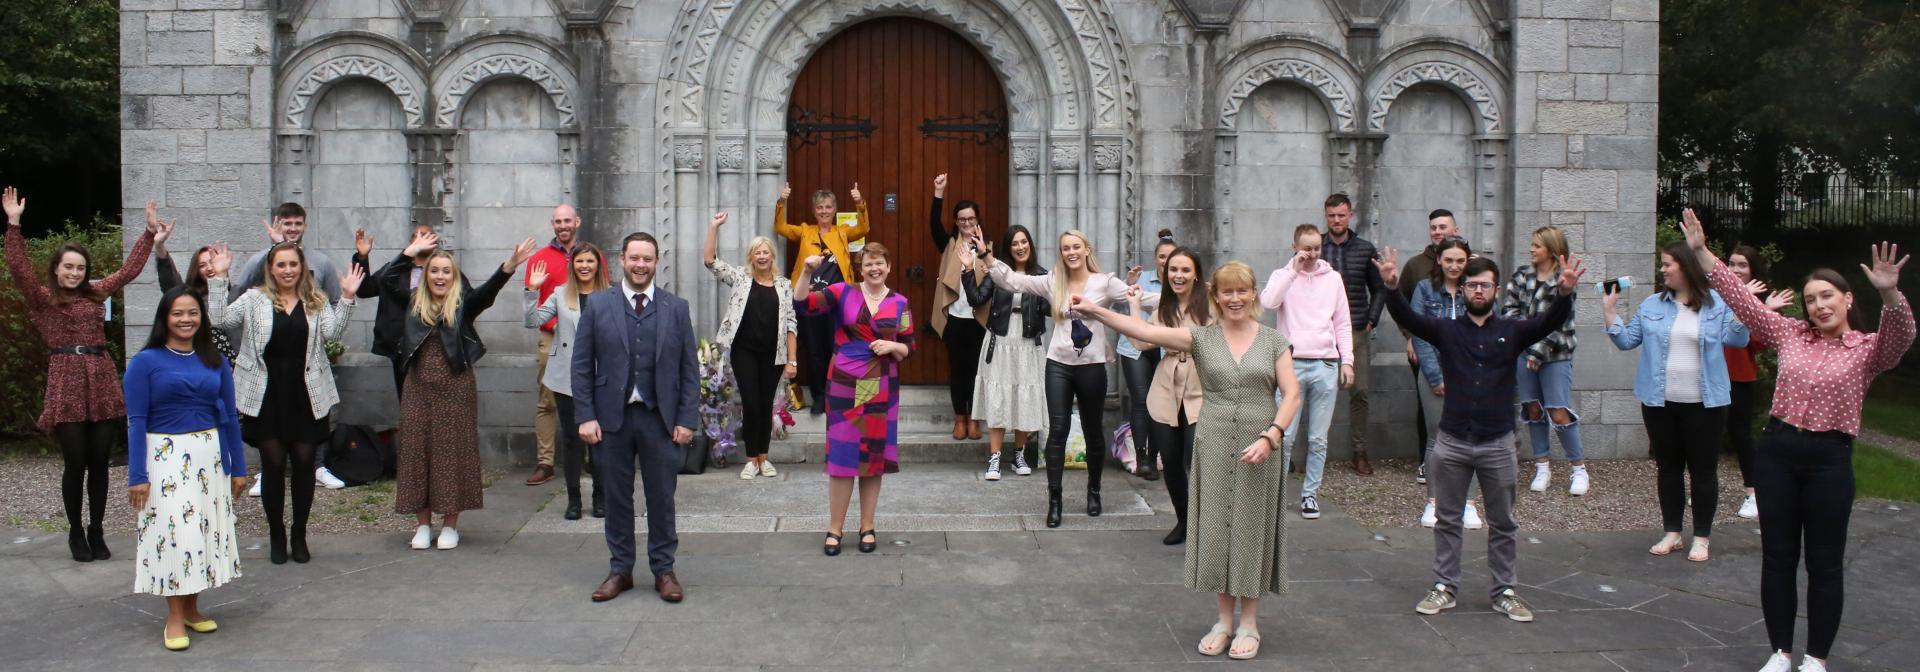 Year four mental Health Student Nurses celebrate with a blessing of the Hands Ceremony at the Honan Chapel, UCC